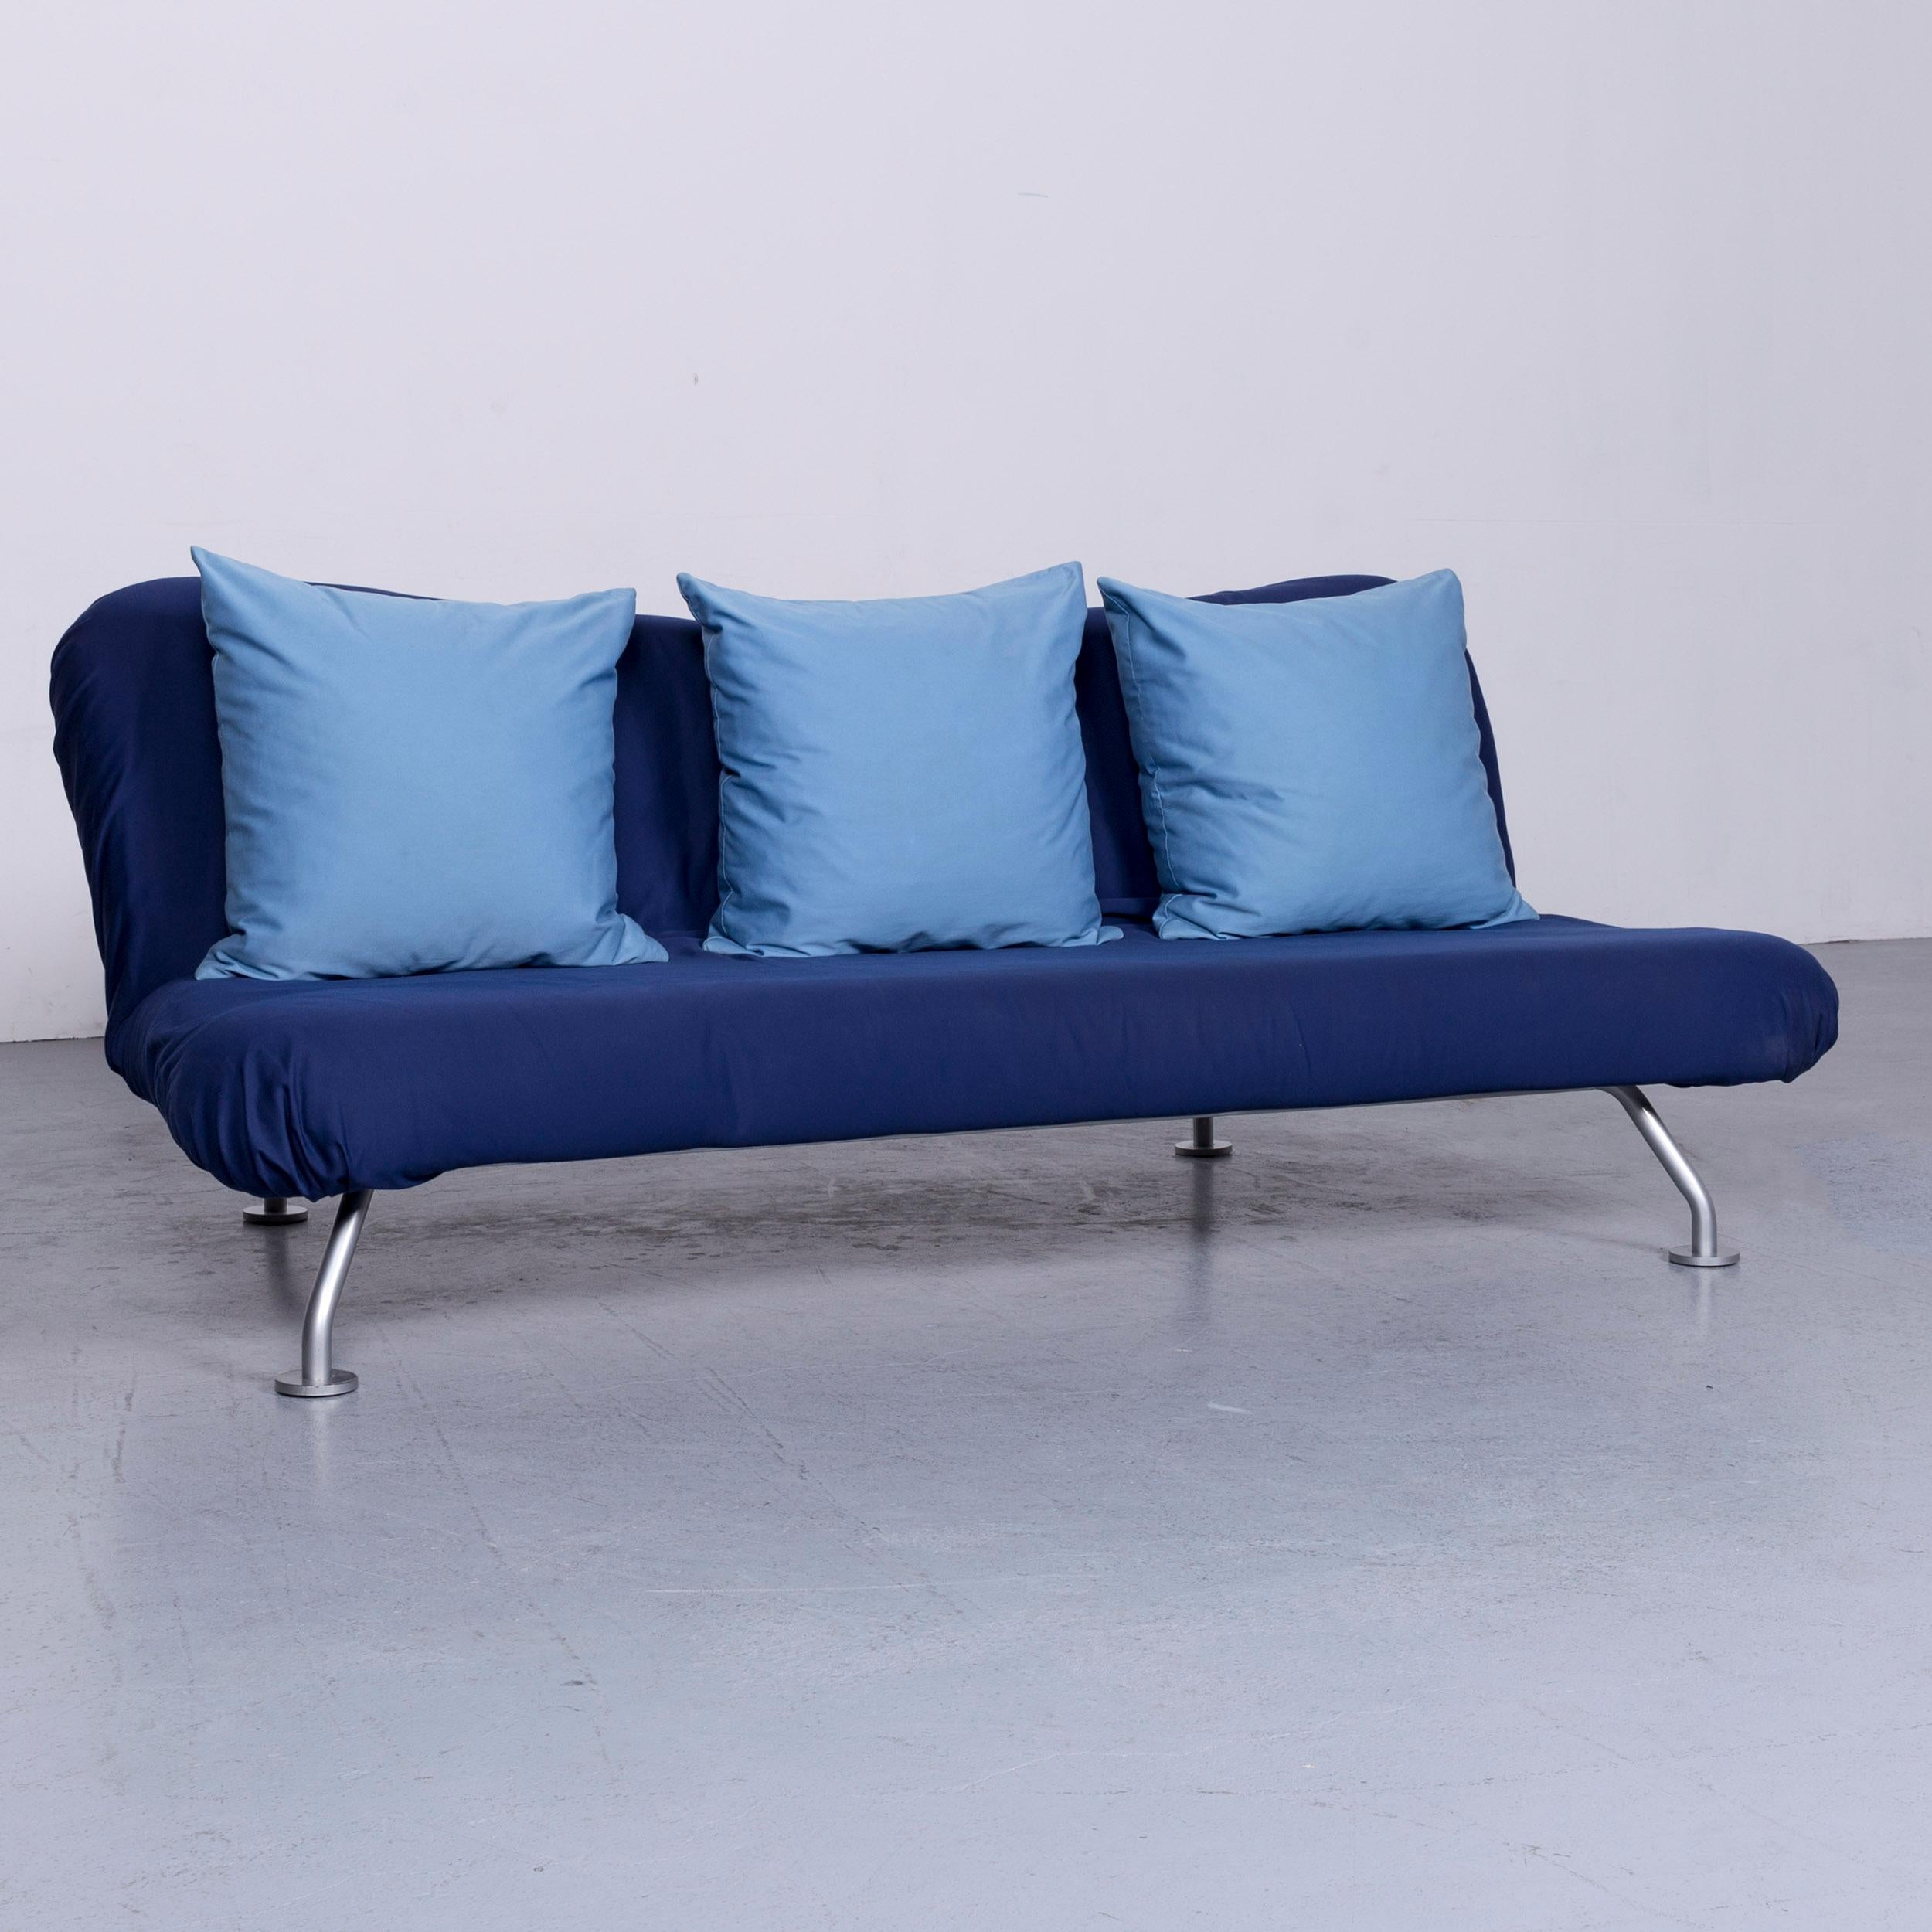 German Brühl & Sippold More Designer Fabric Sofa Blue Three-Seat Couch with Function For Sale